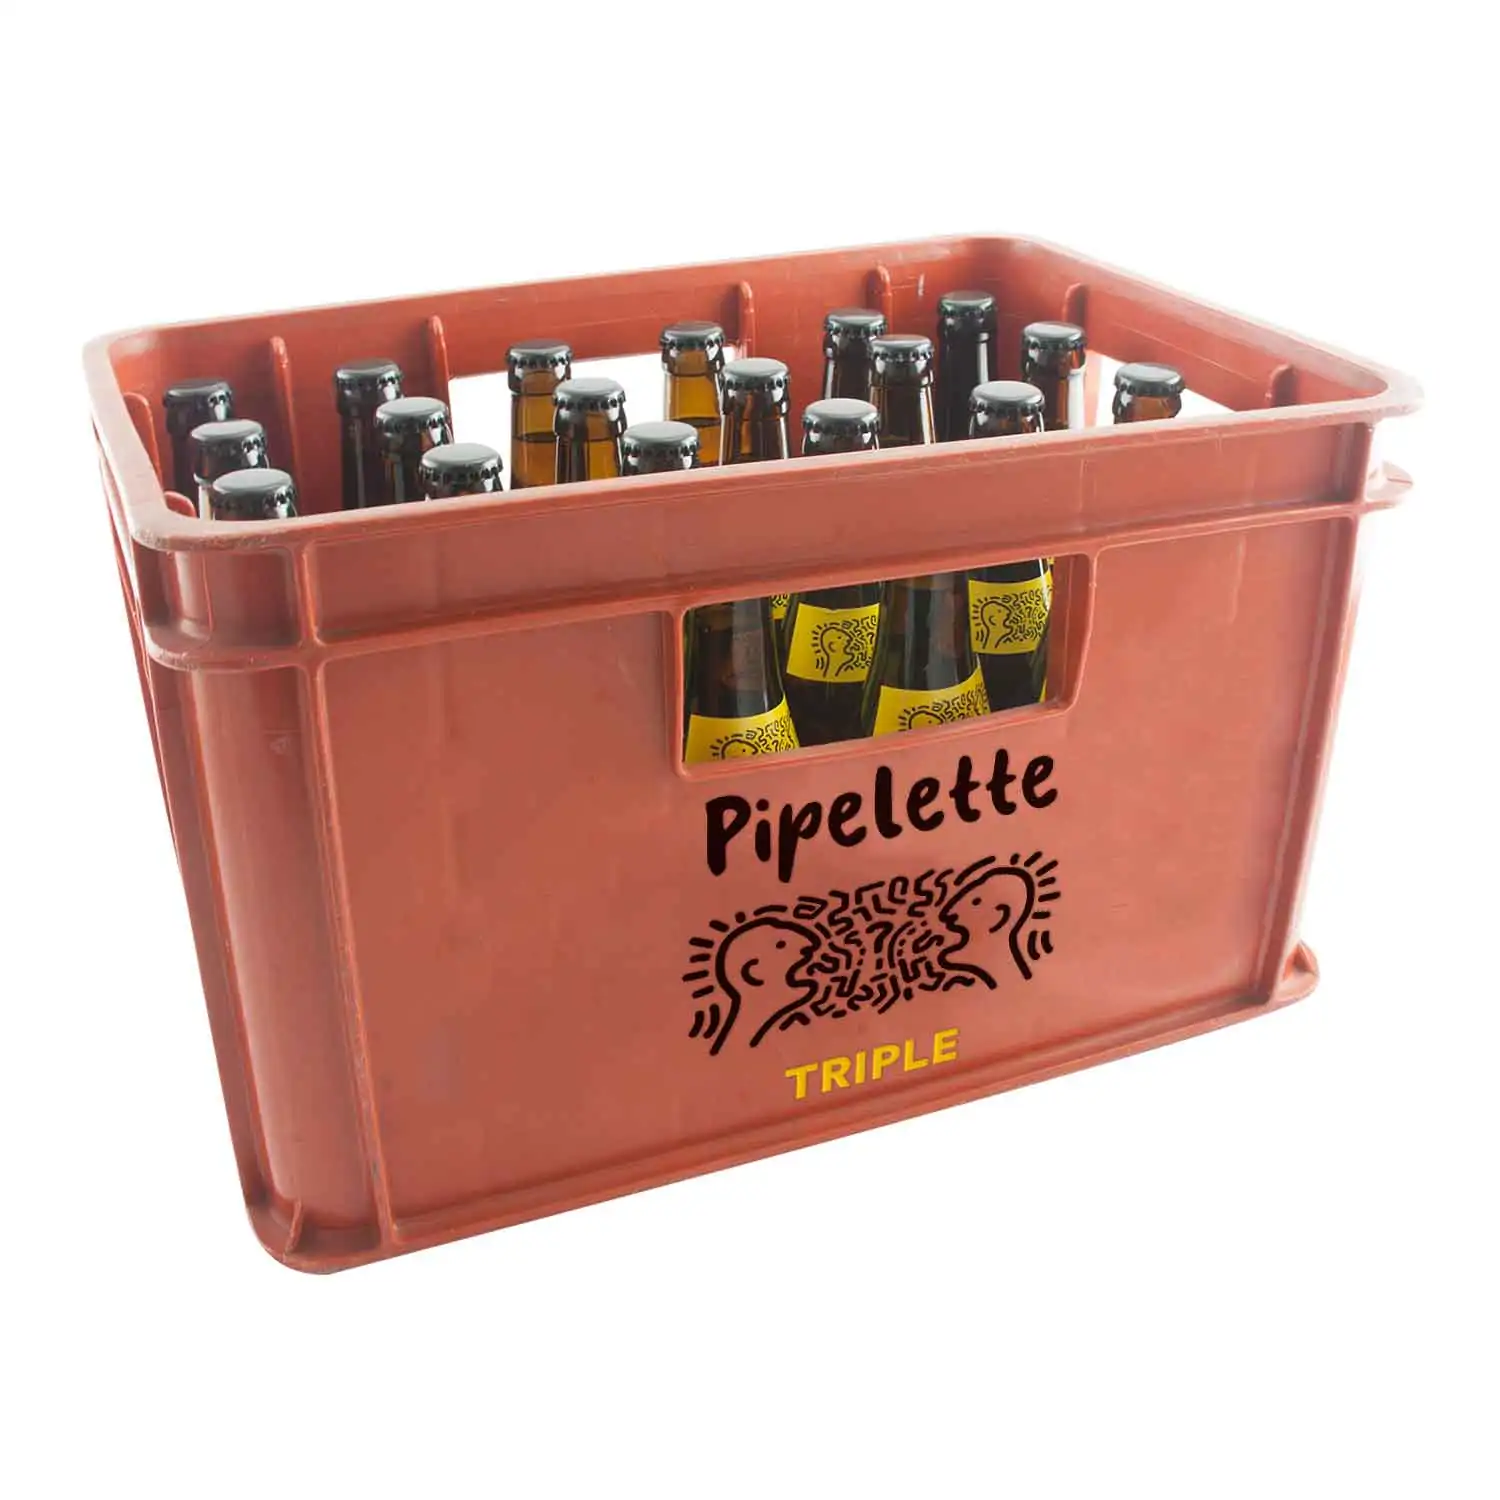 24x Pipelette triple 33cl Alc 8% - Buy at Real Tobacco